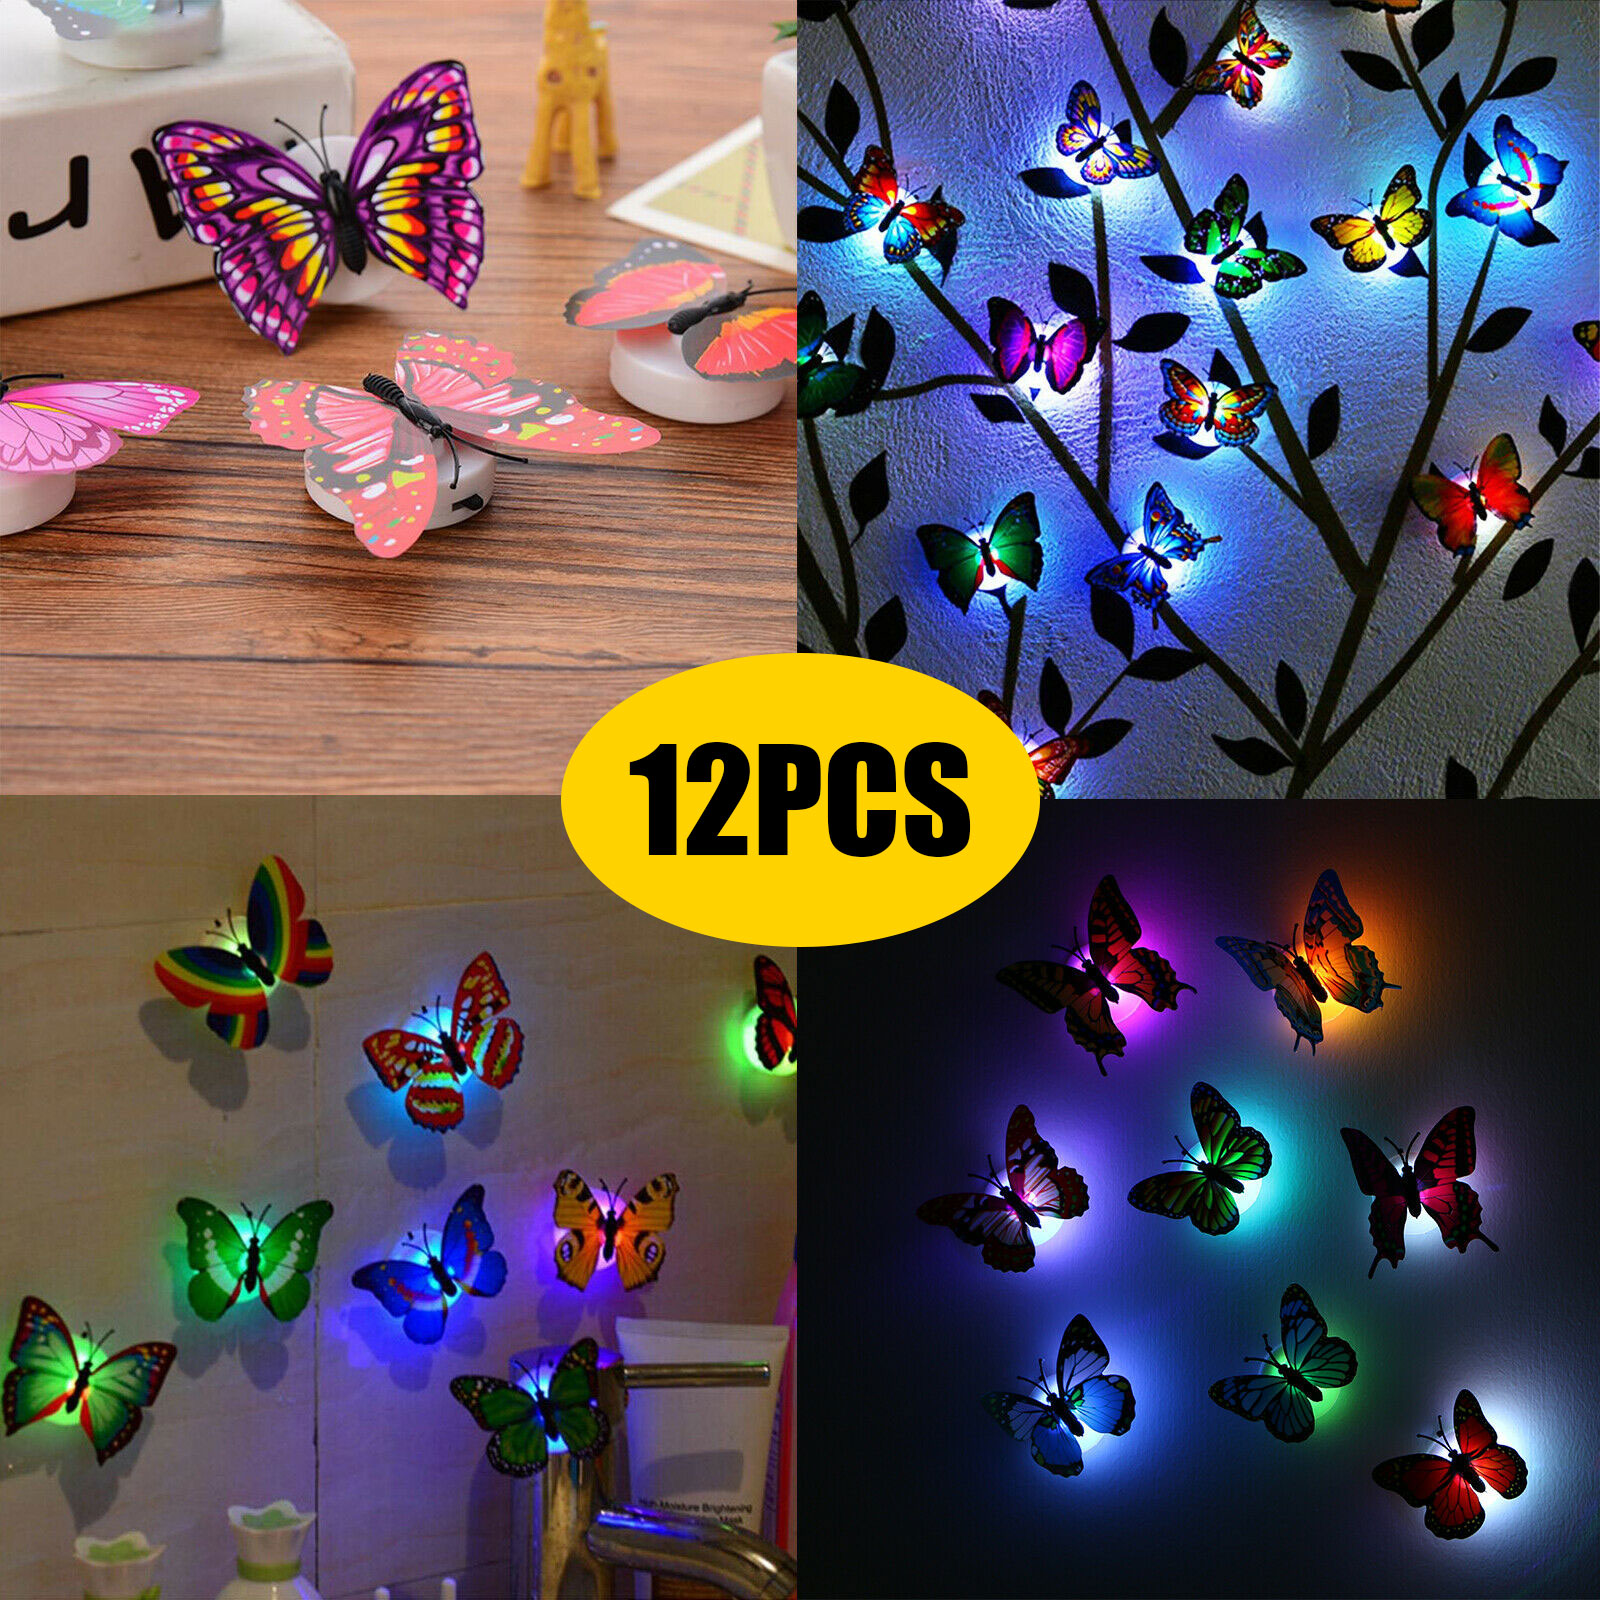 Colorful Romantic LED Butterfly Night LED Light Home Room Decor Lamp Fashion 